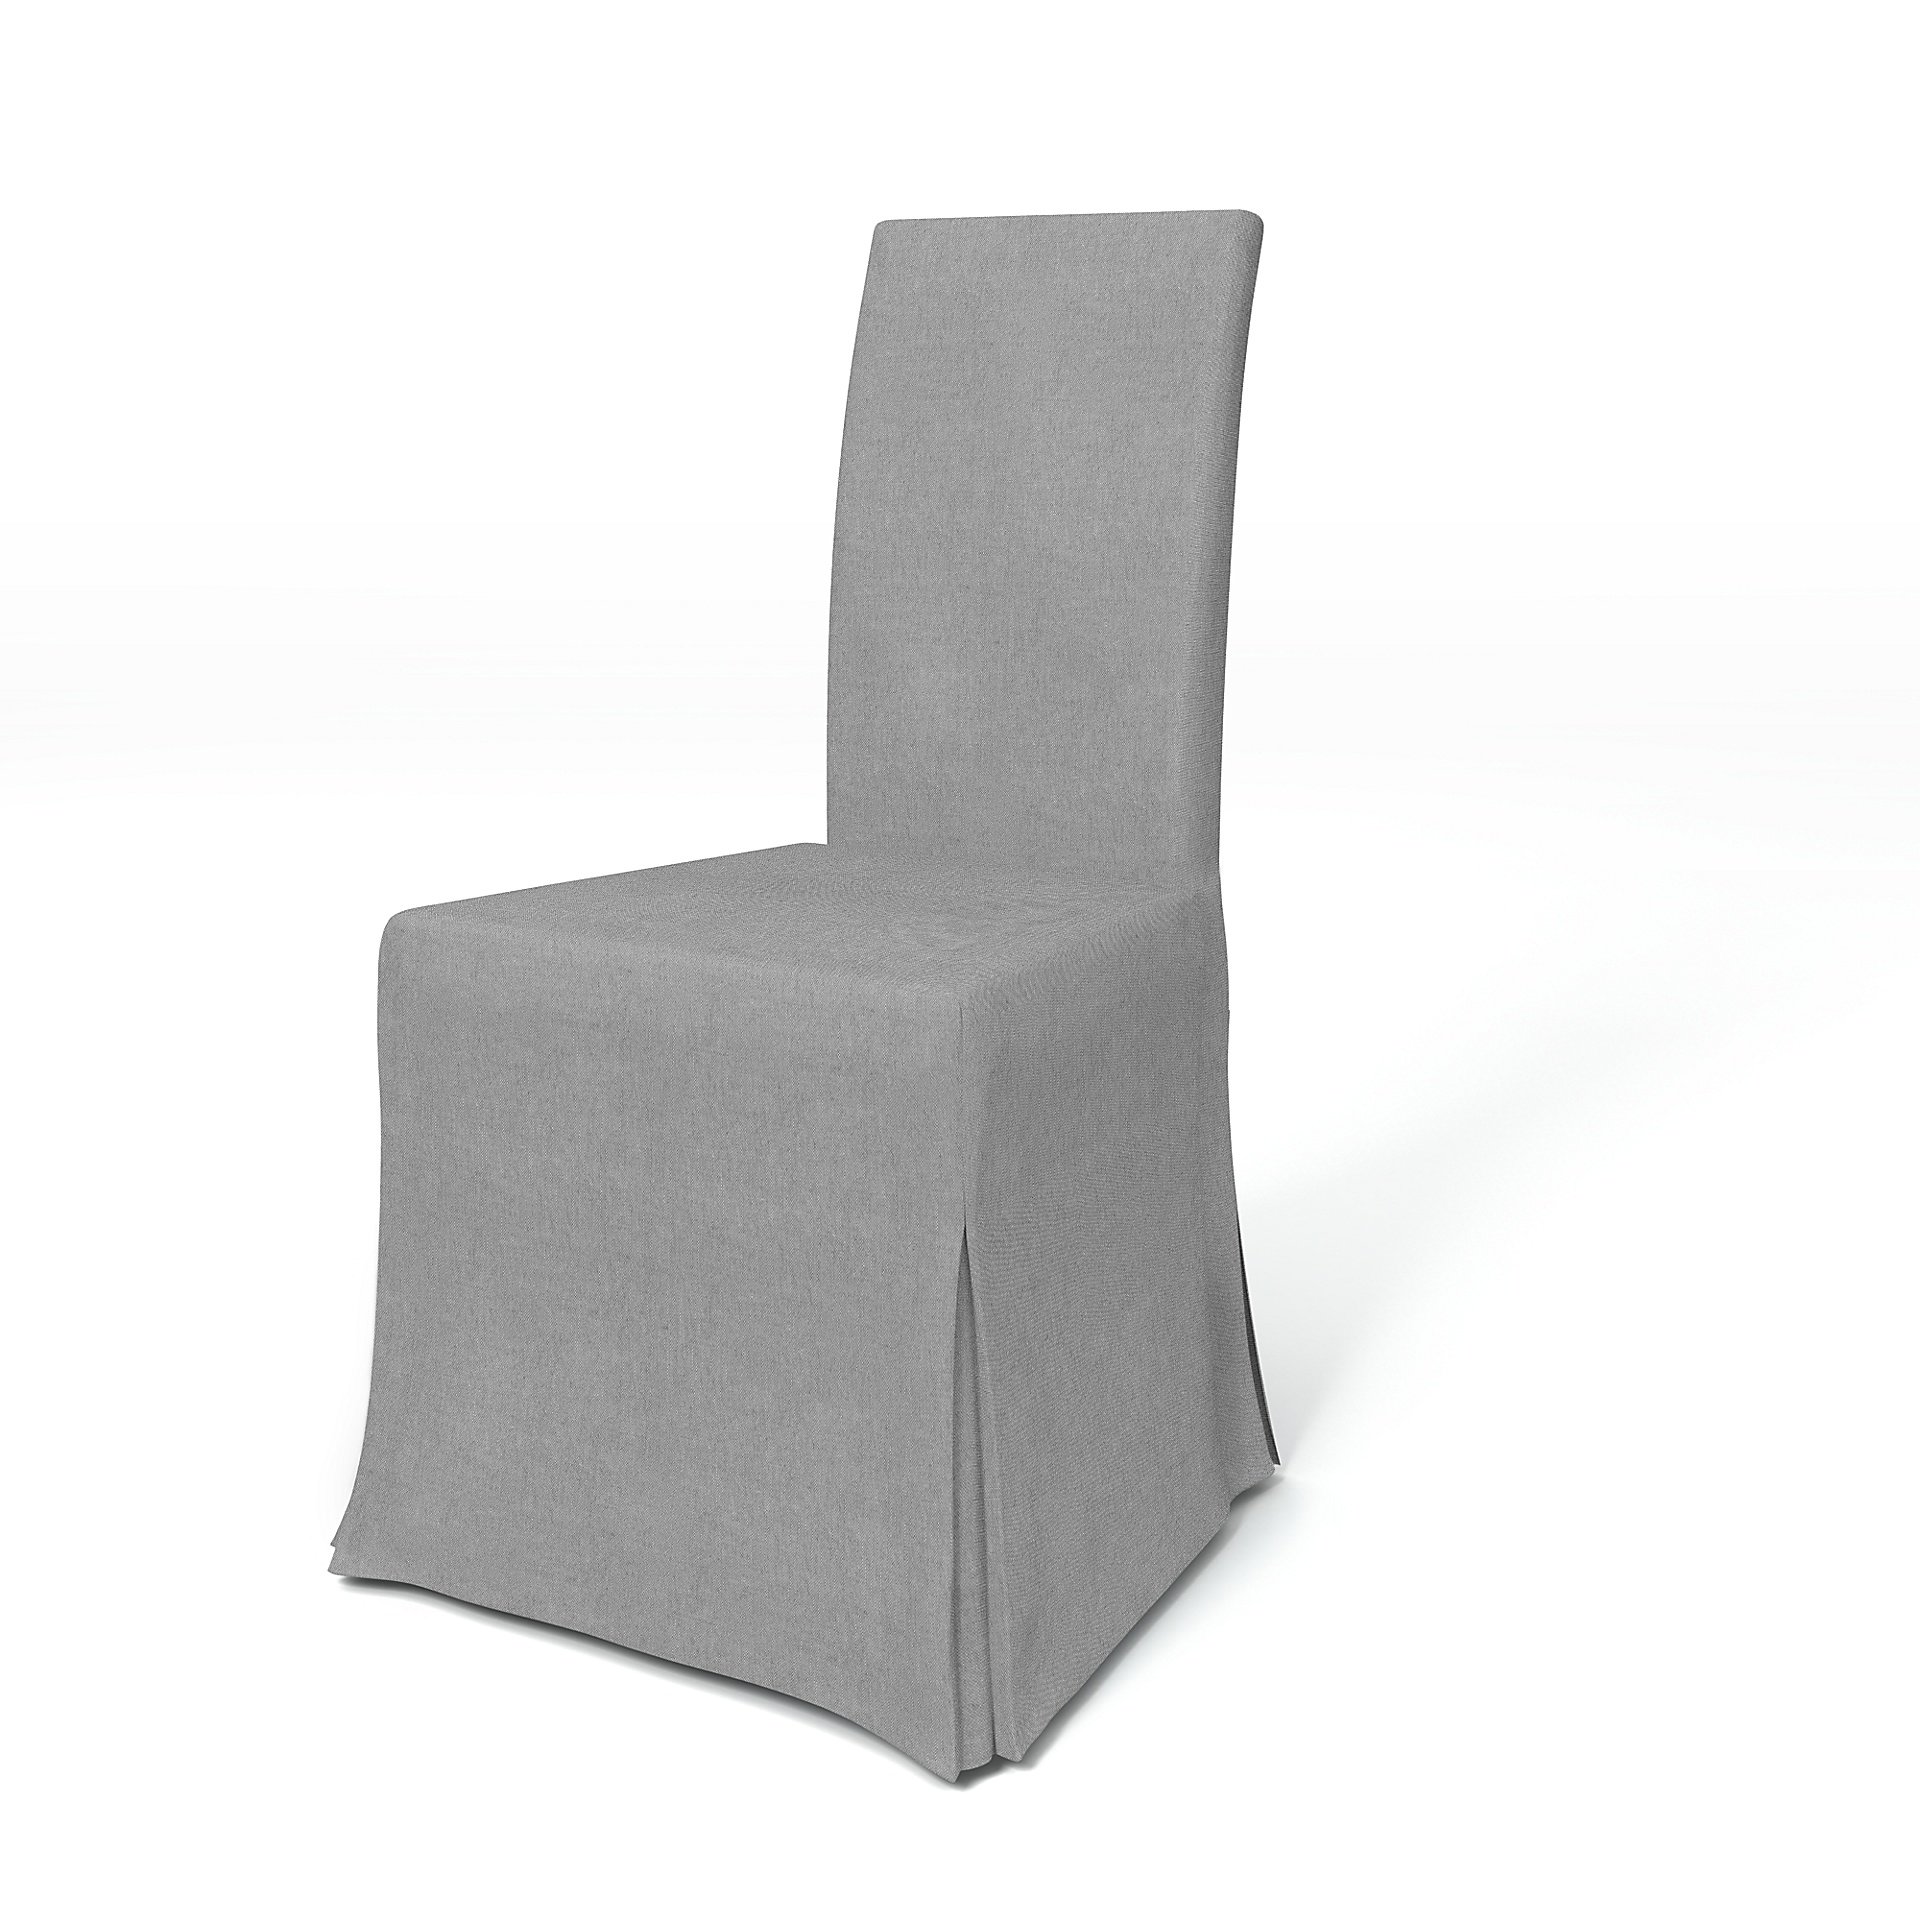 IKEA - Harry Dining Chair Cover, Graphite, Linen - Bemz